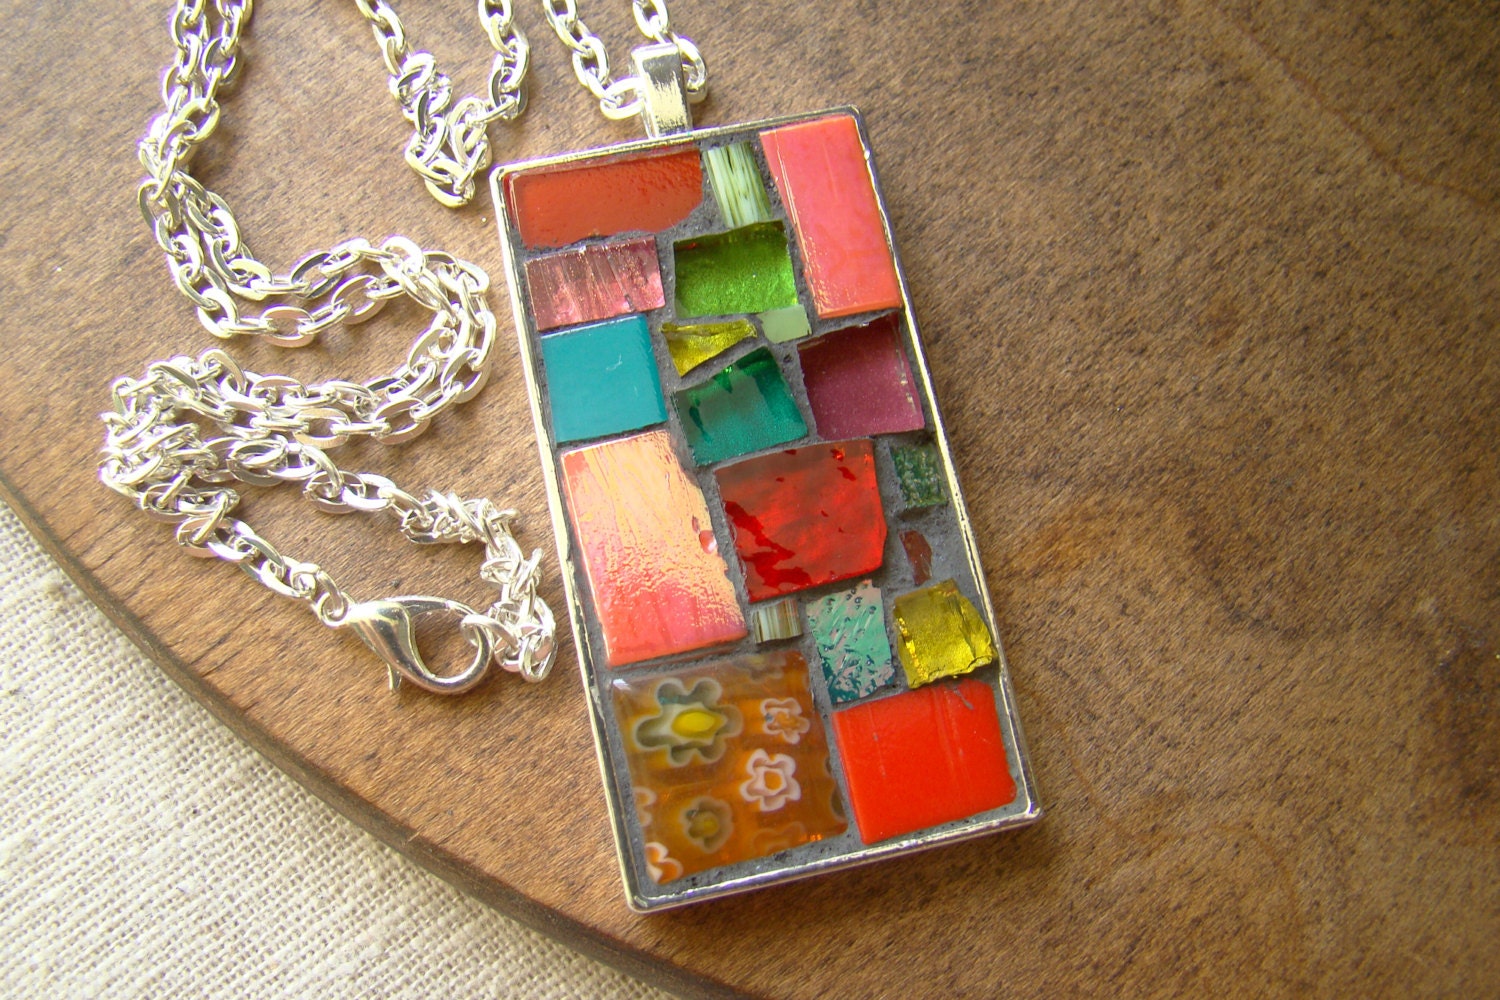 Mosaic Art Pendant with Chain: FRUITY Tropical Colorful Mixed Media Assorted Glass and Tile Design OOAK Red Pink Salmon Aqua Green Orange - GeminiMoonMosaics